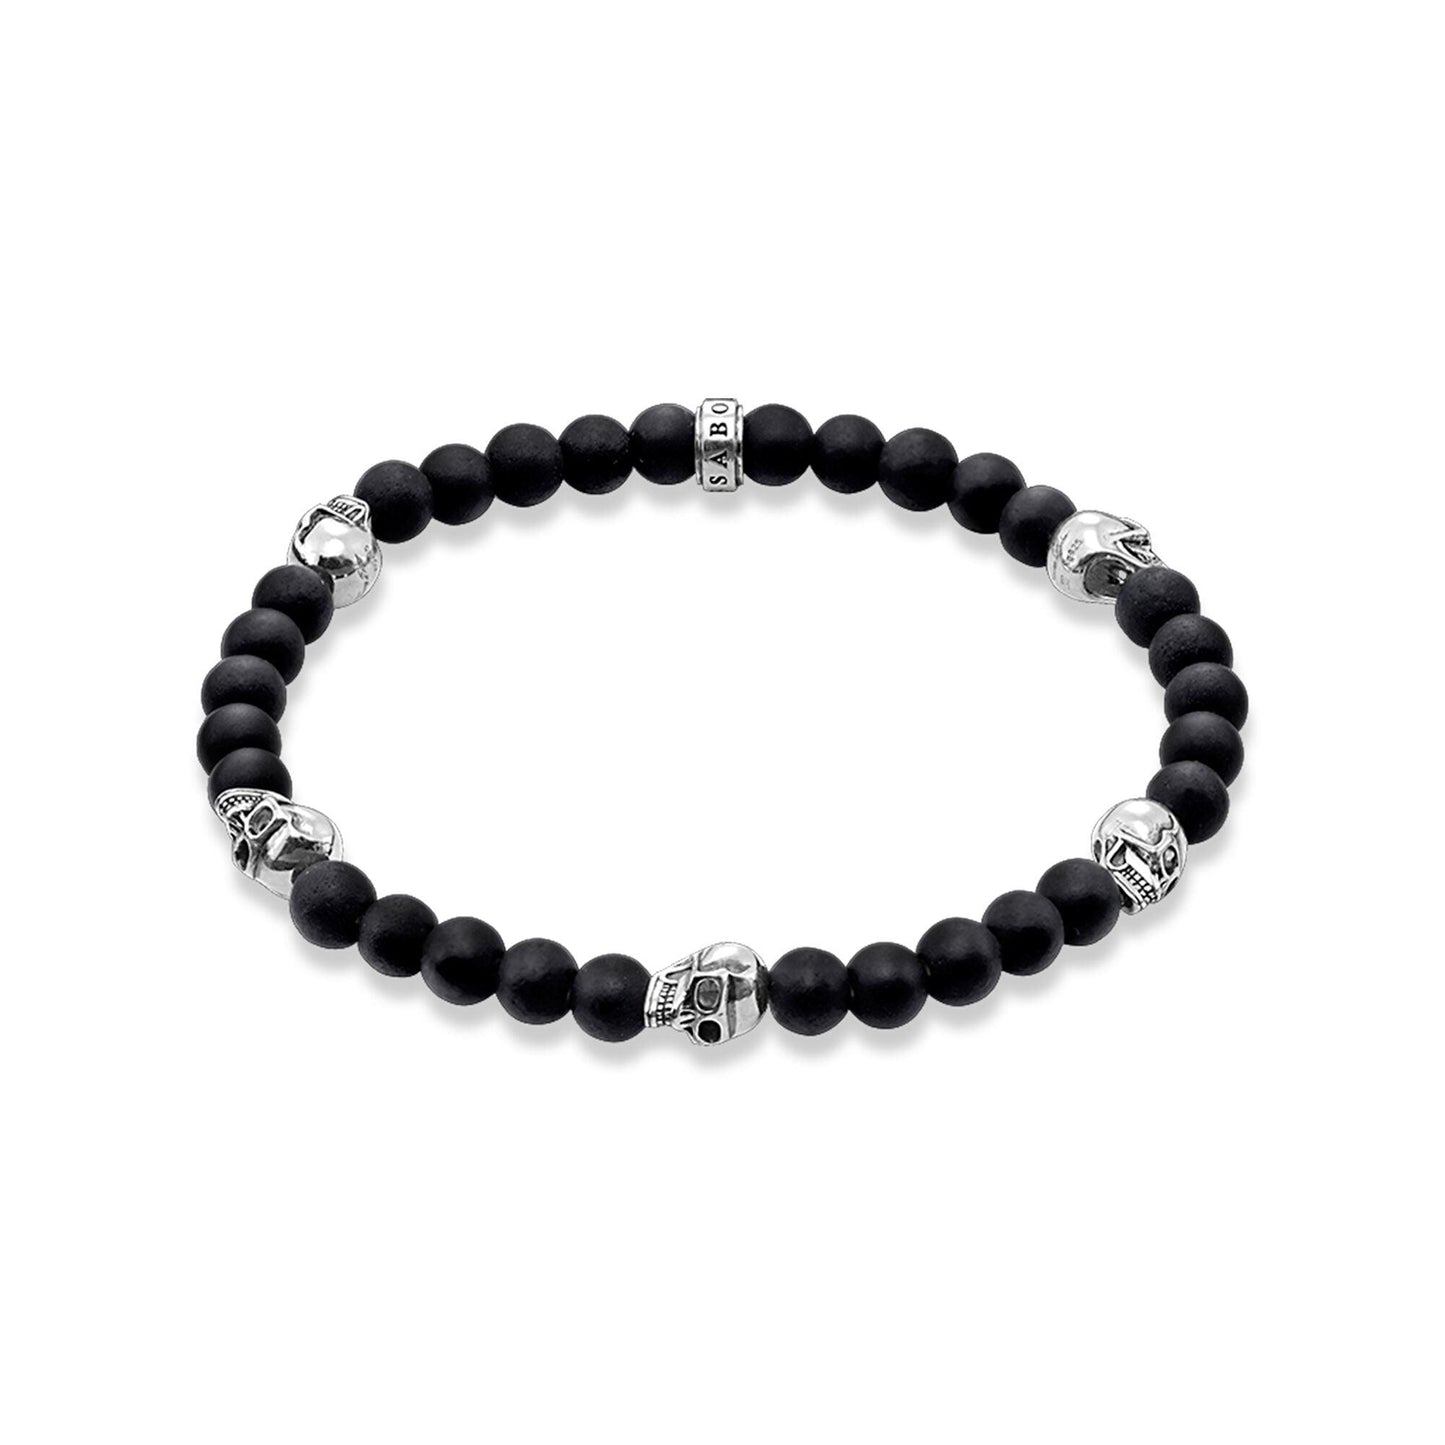 Thomas Sabo Sterling Silver and Obsidian Skull Stretchy Bracelet A1097 - Judith Hart Jewellers